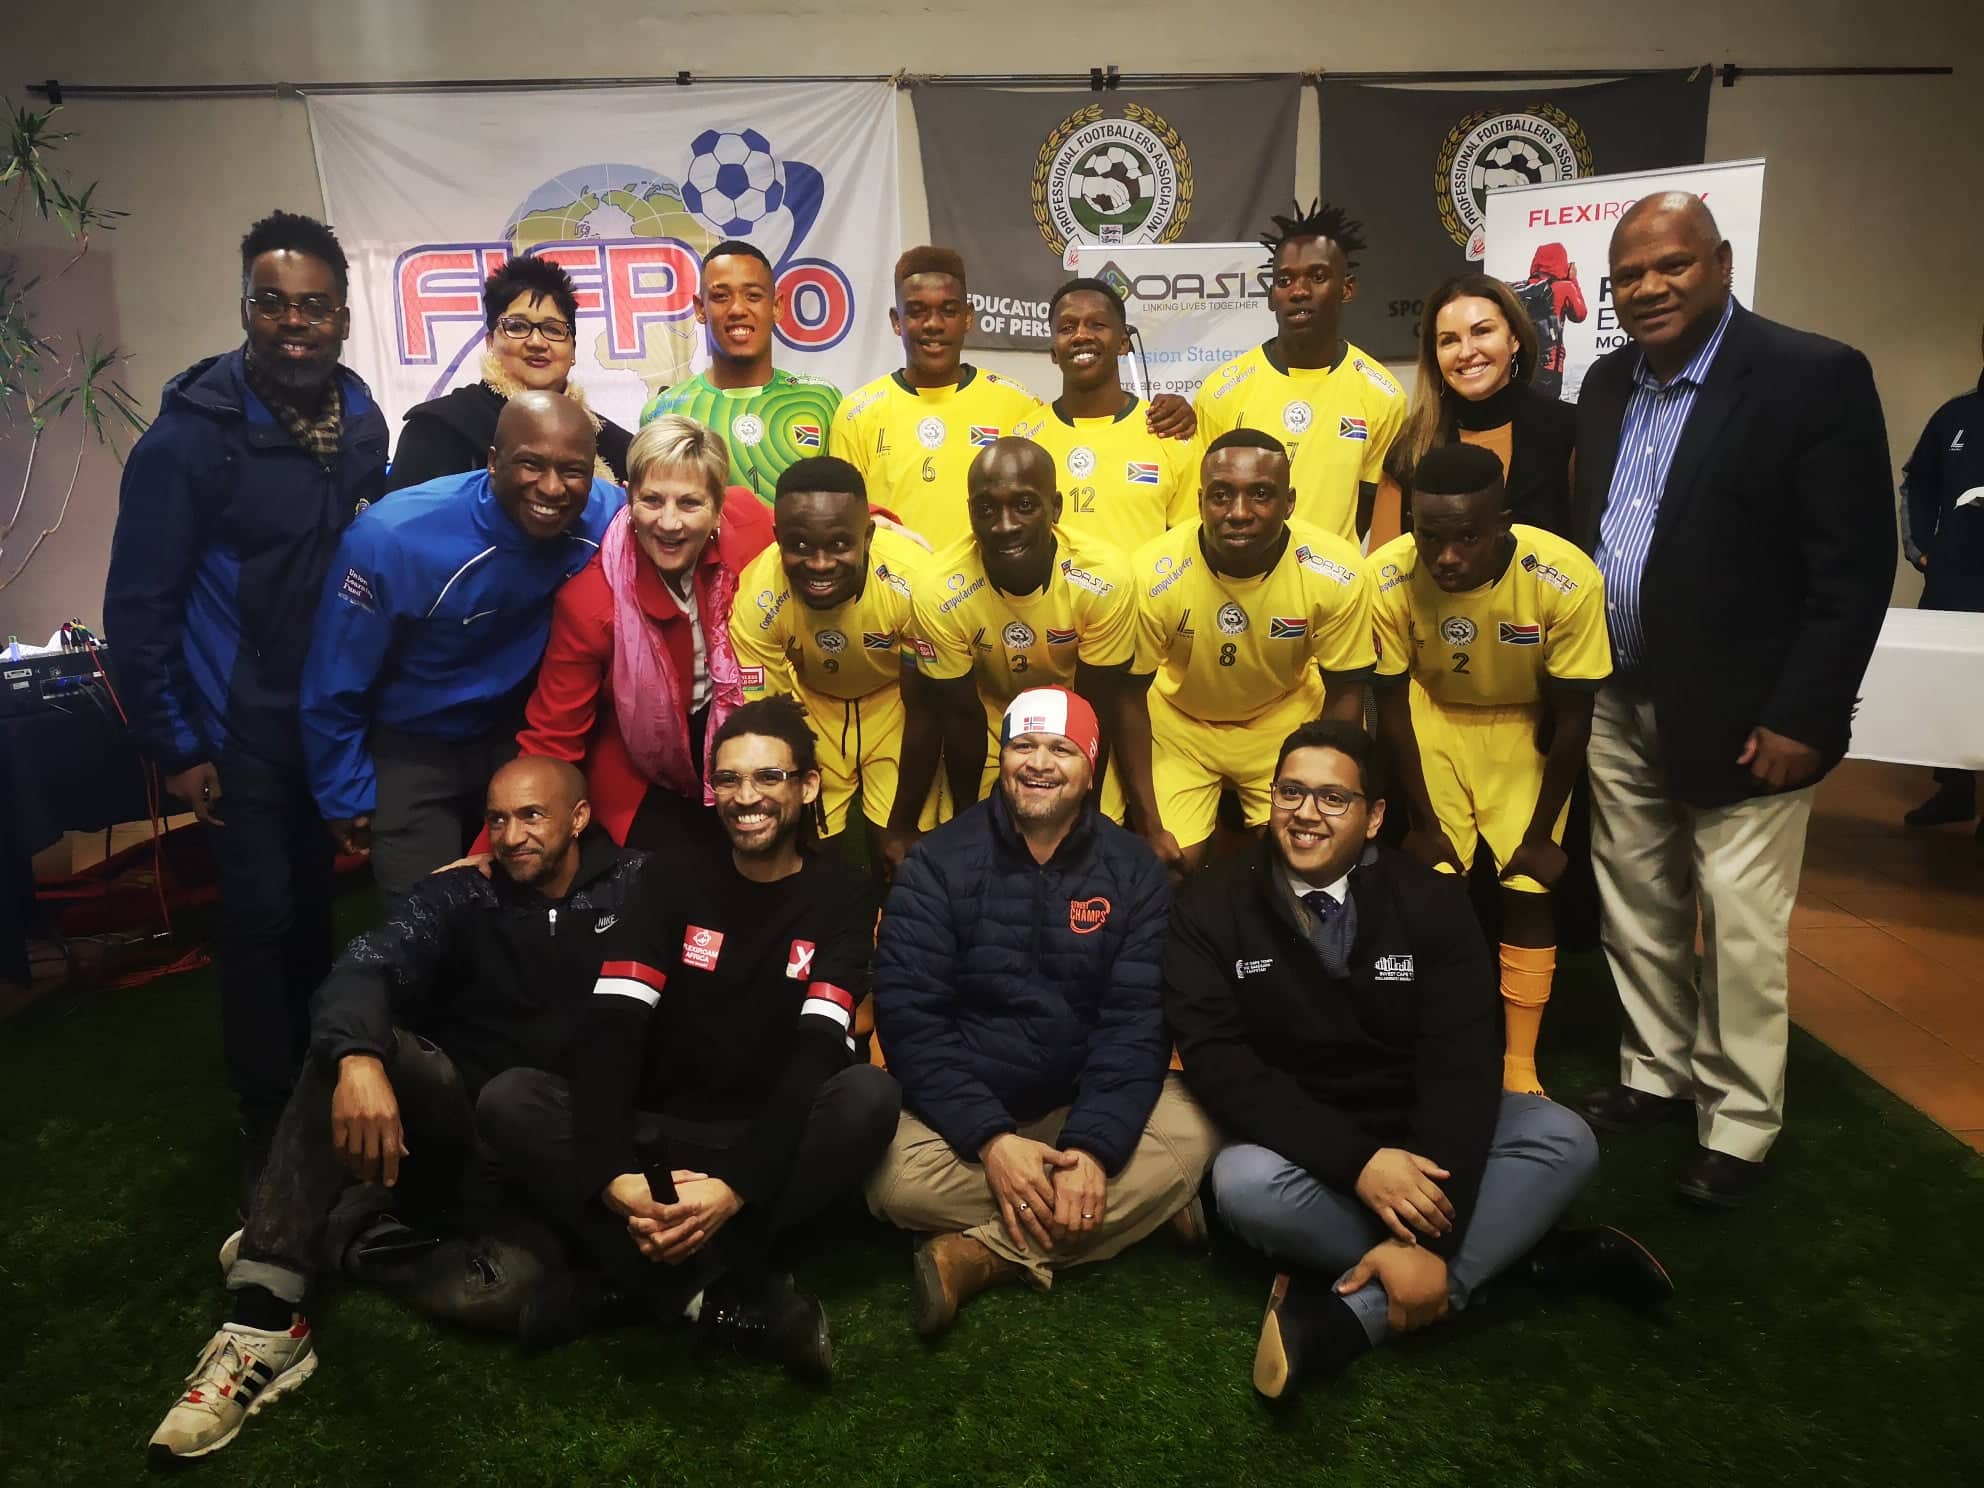 Western Cape Government officially bid farewell to SA Homeless Soccer World Cup Team in Cape Town